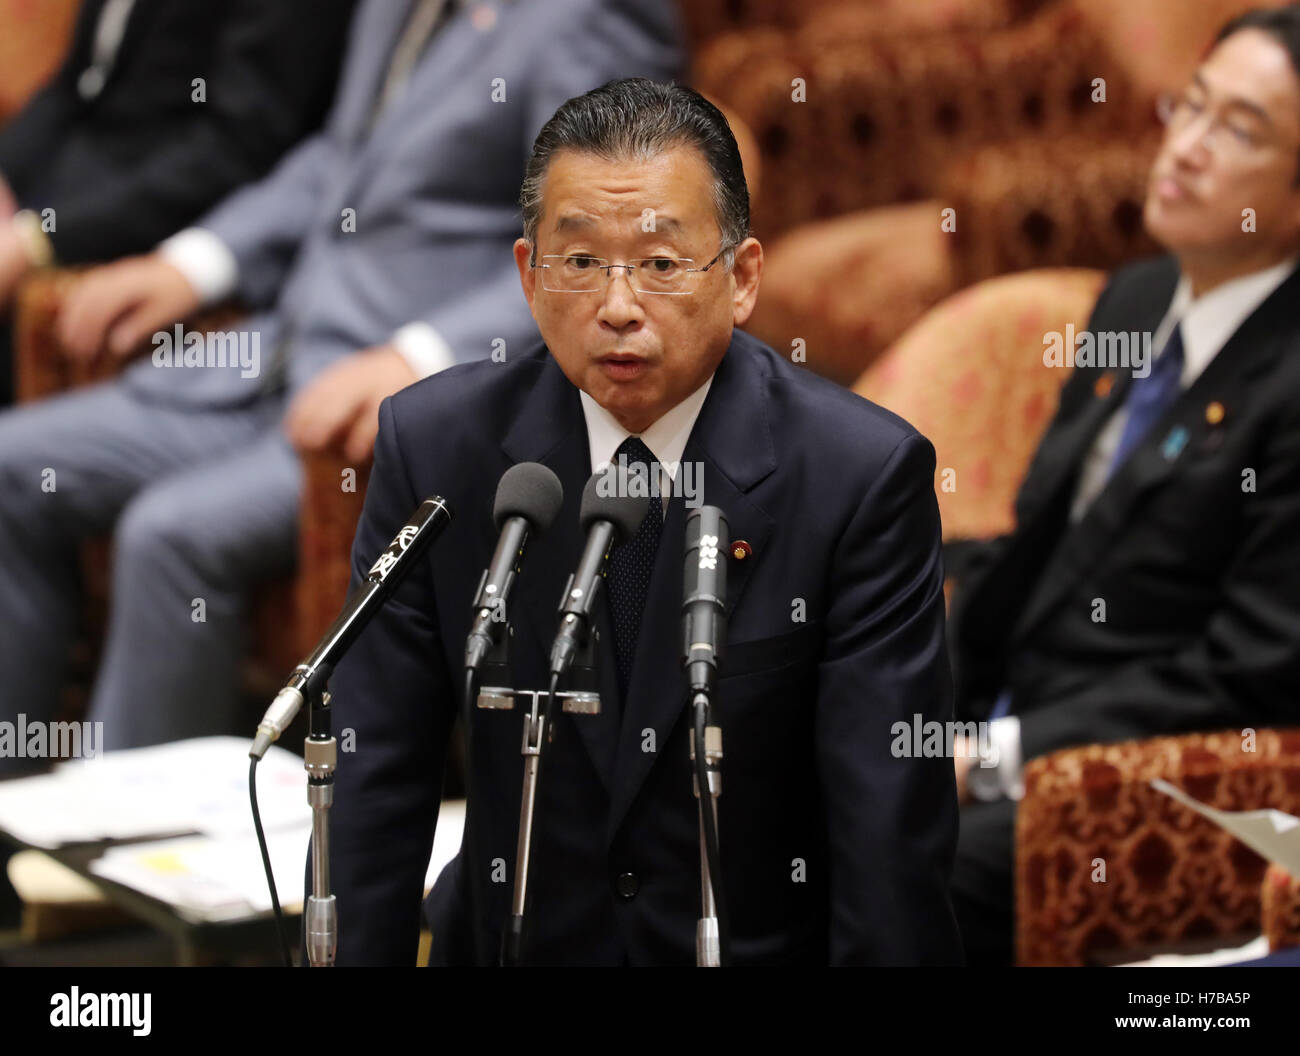 Tokyo, Japan. 4th Nov, 2016. Japanese Agriculture Minister Yuji Yamamoto speaks at Lower House's ad hoc committee session of the Tarns Pacific Partnership (TPP) trade pact at the National Diet in Tokyo on Friday, November 4, 2016. Opposition parties called for Yamamoto's resignation over his gaffe, while ruling parties passed the bill of the TPP at the committee session. Credit:  Yoshio Tsunoda/AFLO/Alamy Live News Stock Photo